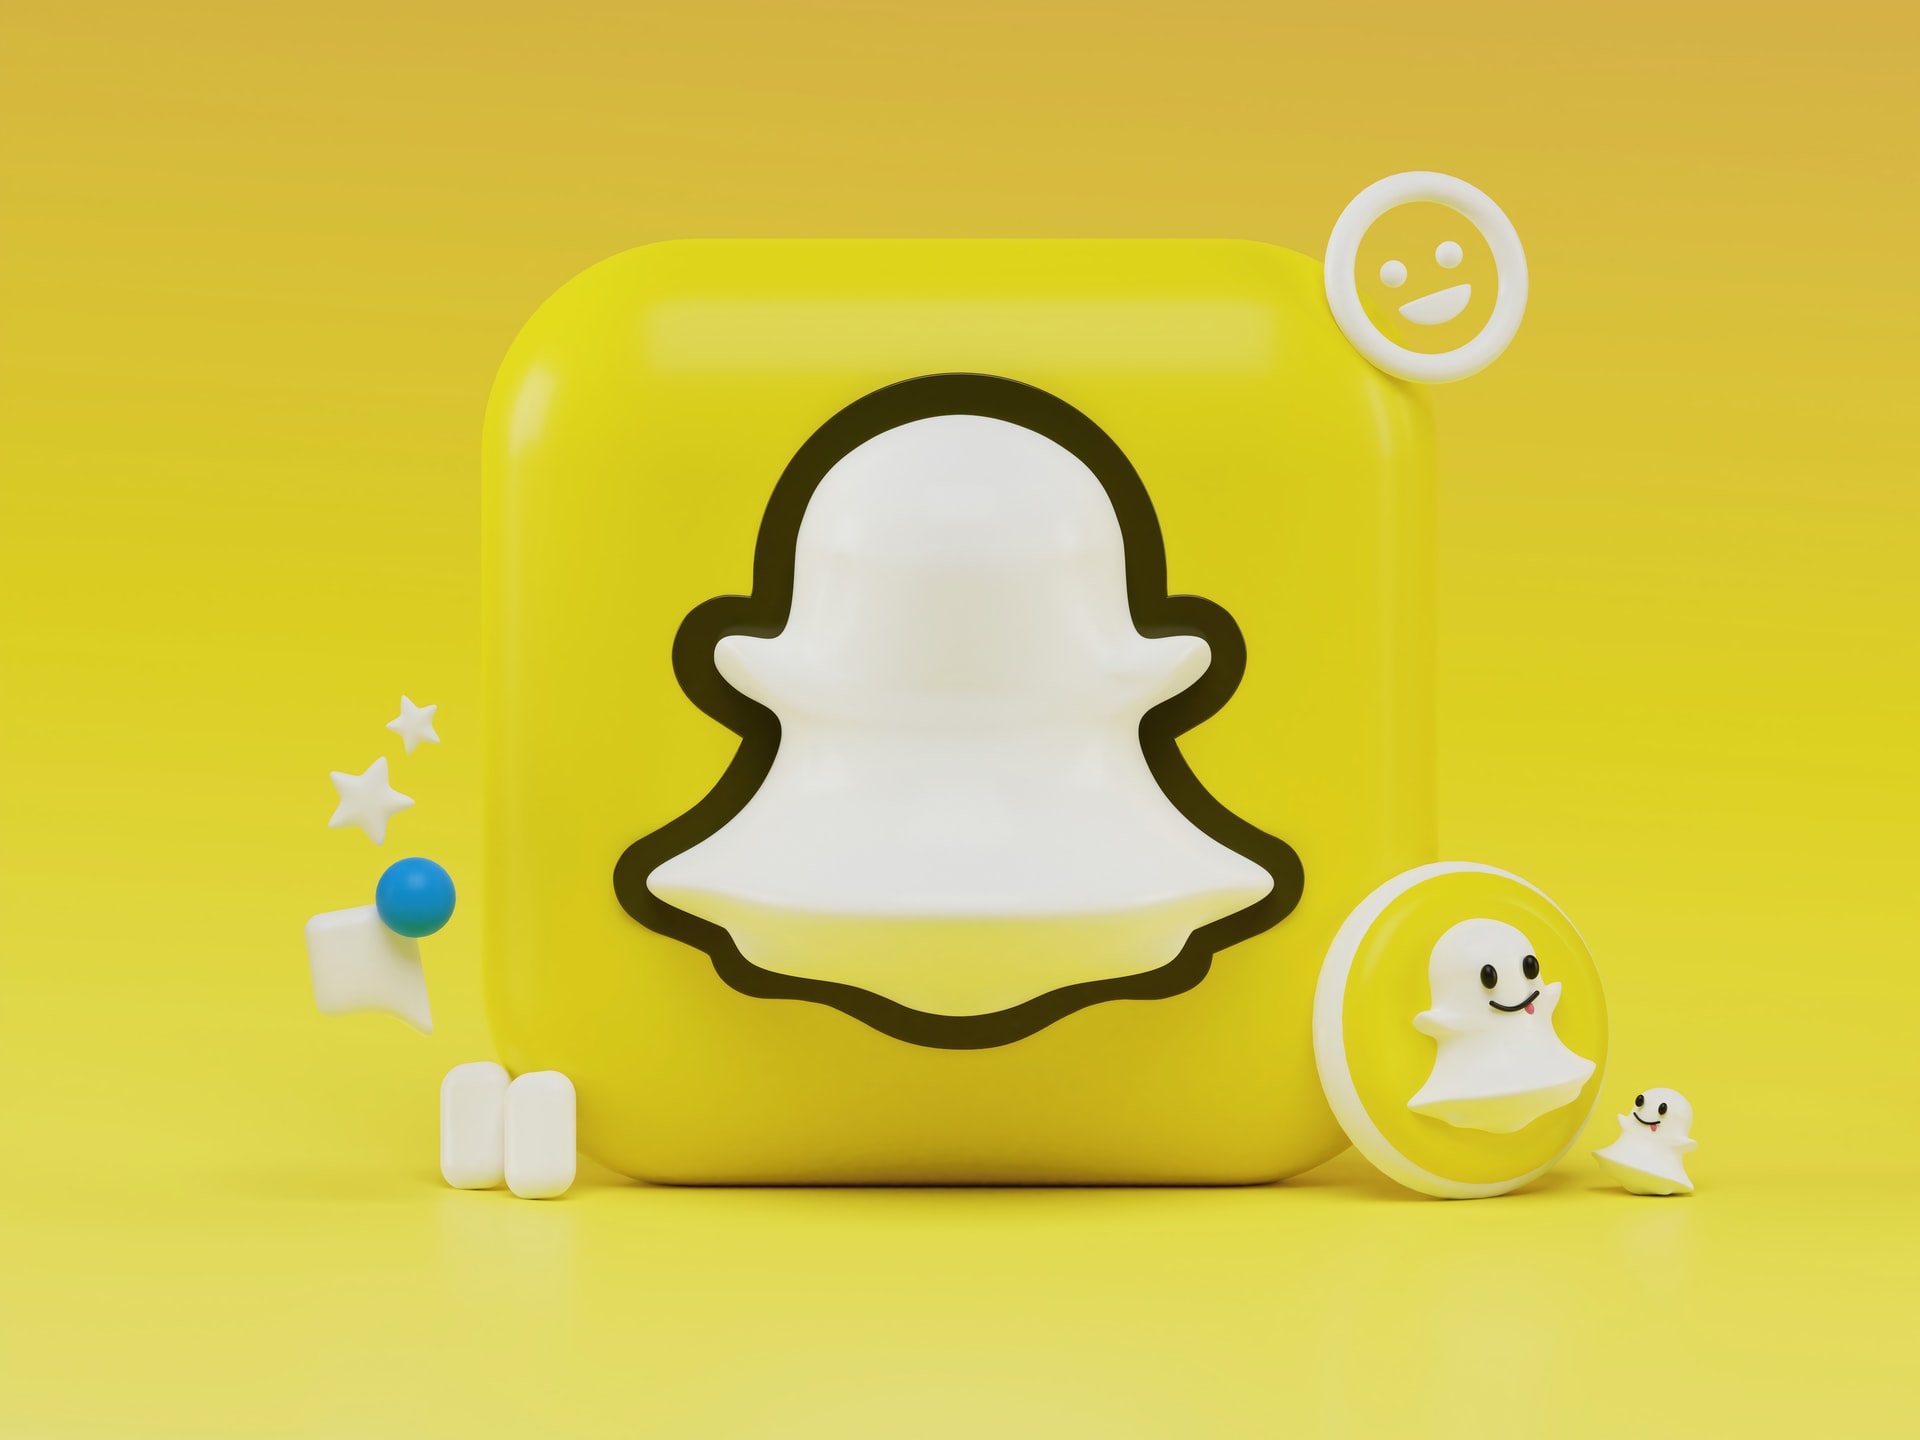 Step By Step Procedure On How To Make A Public Profile On Snapchat